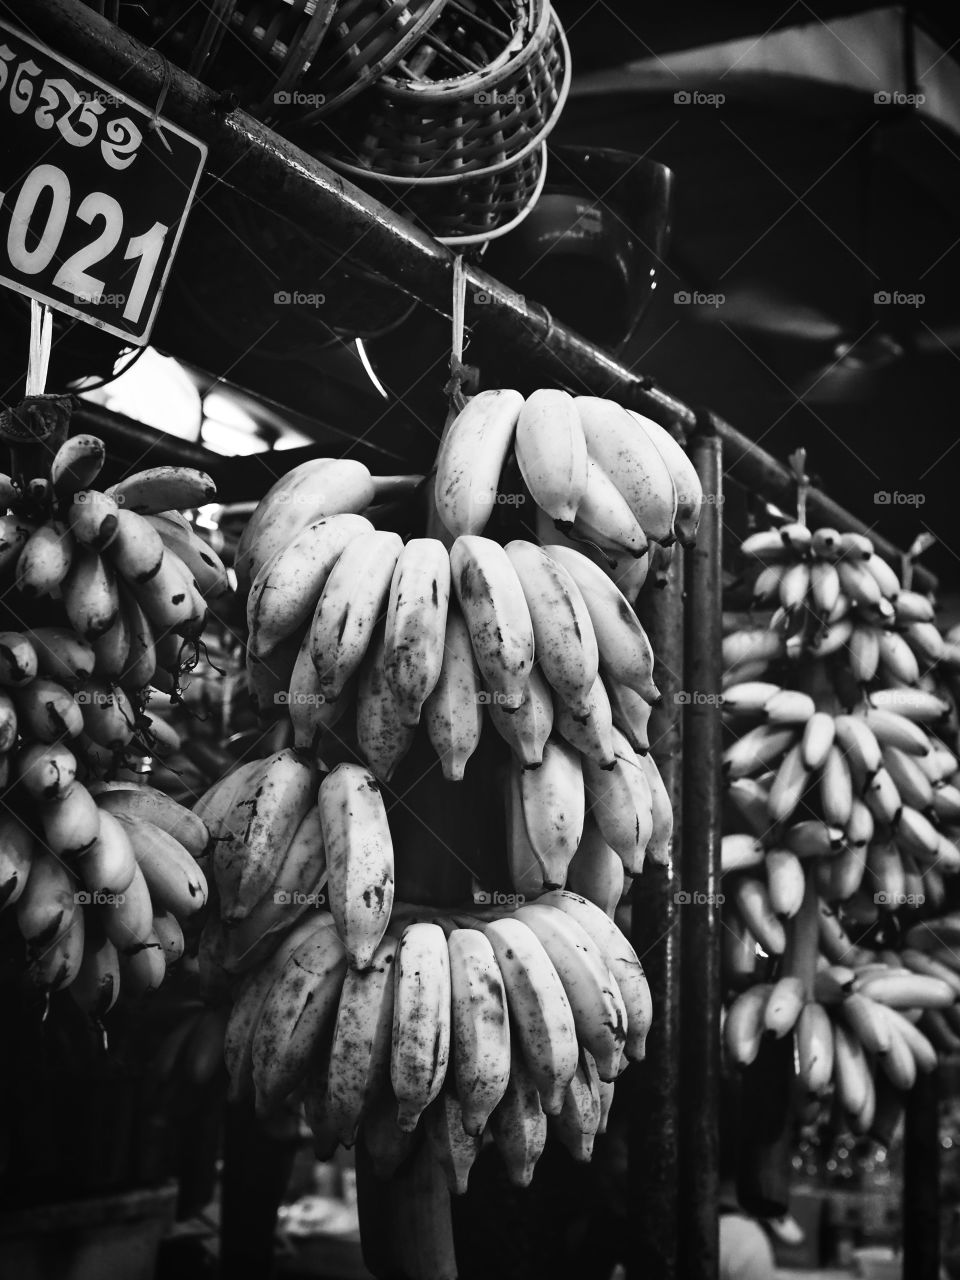 Bananas for sale in black and white 